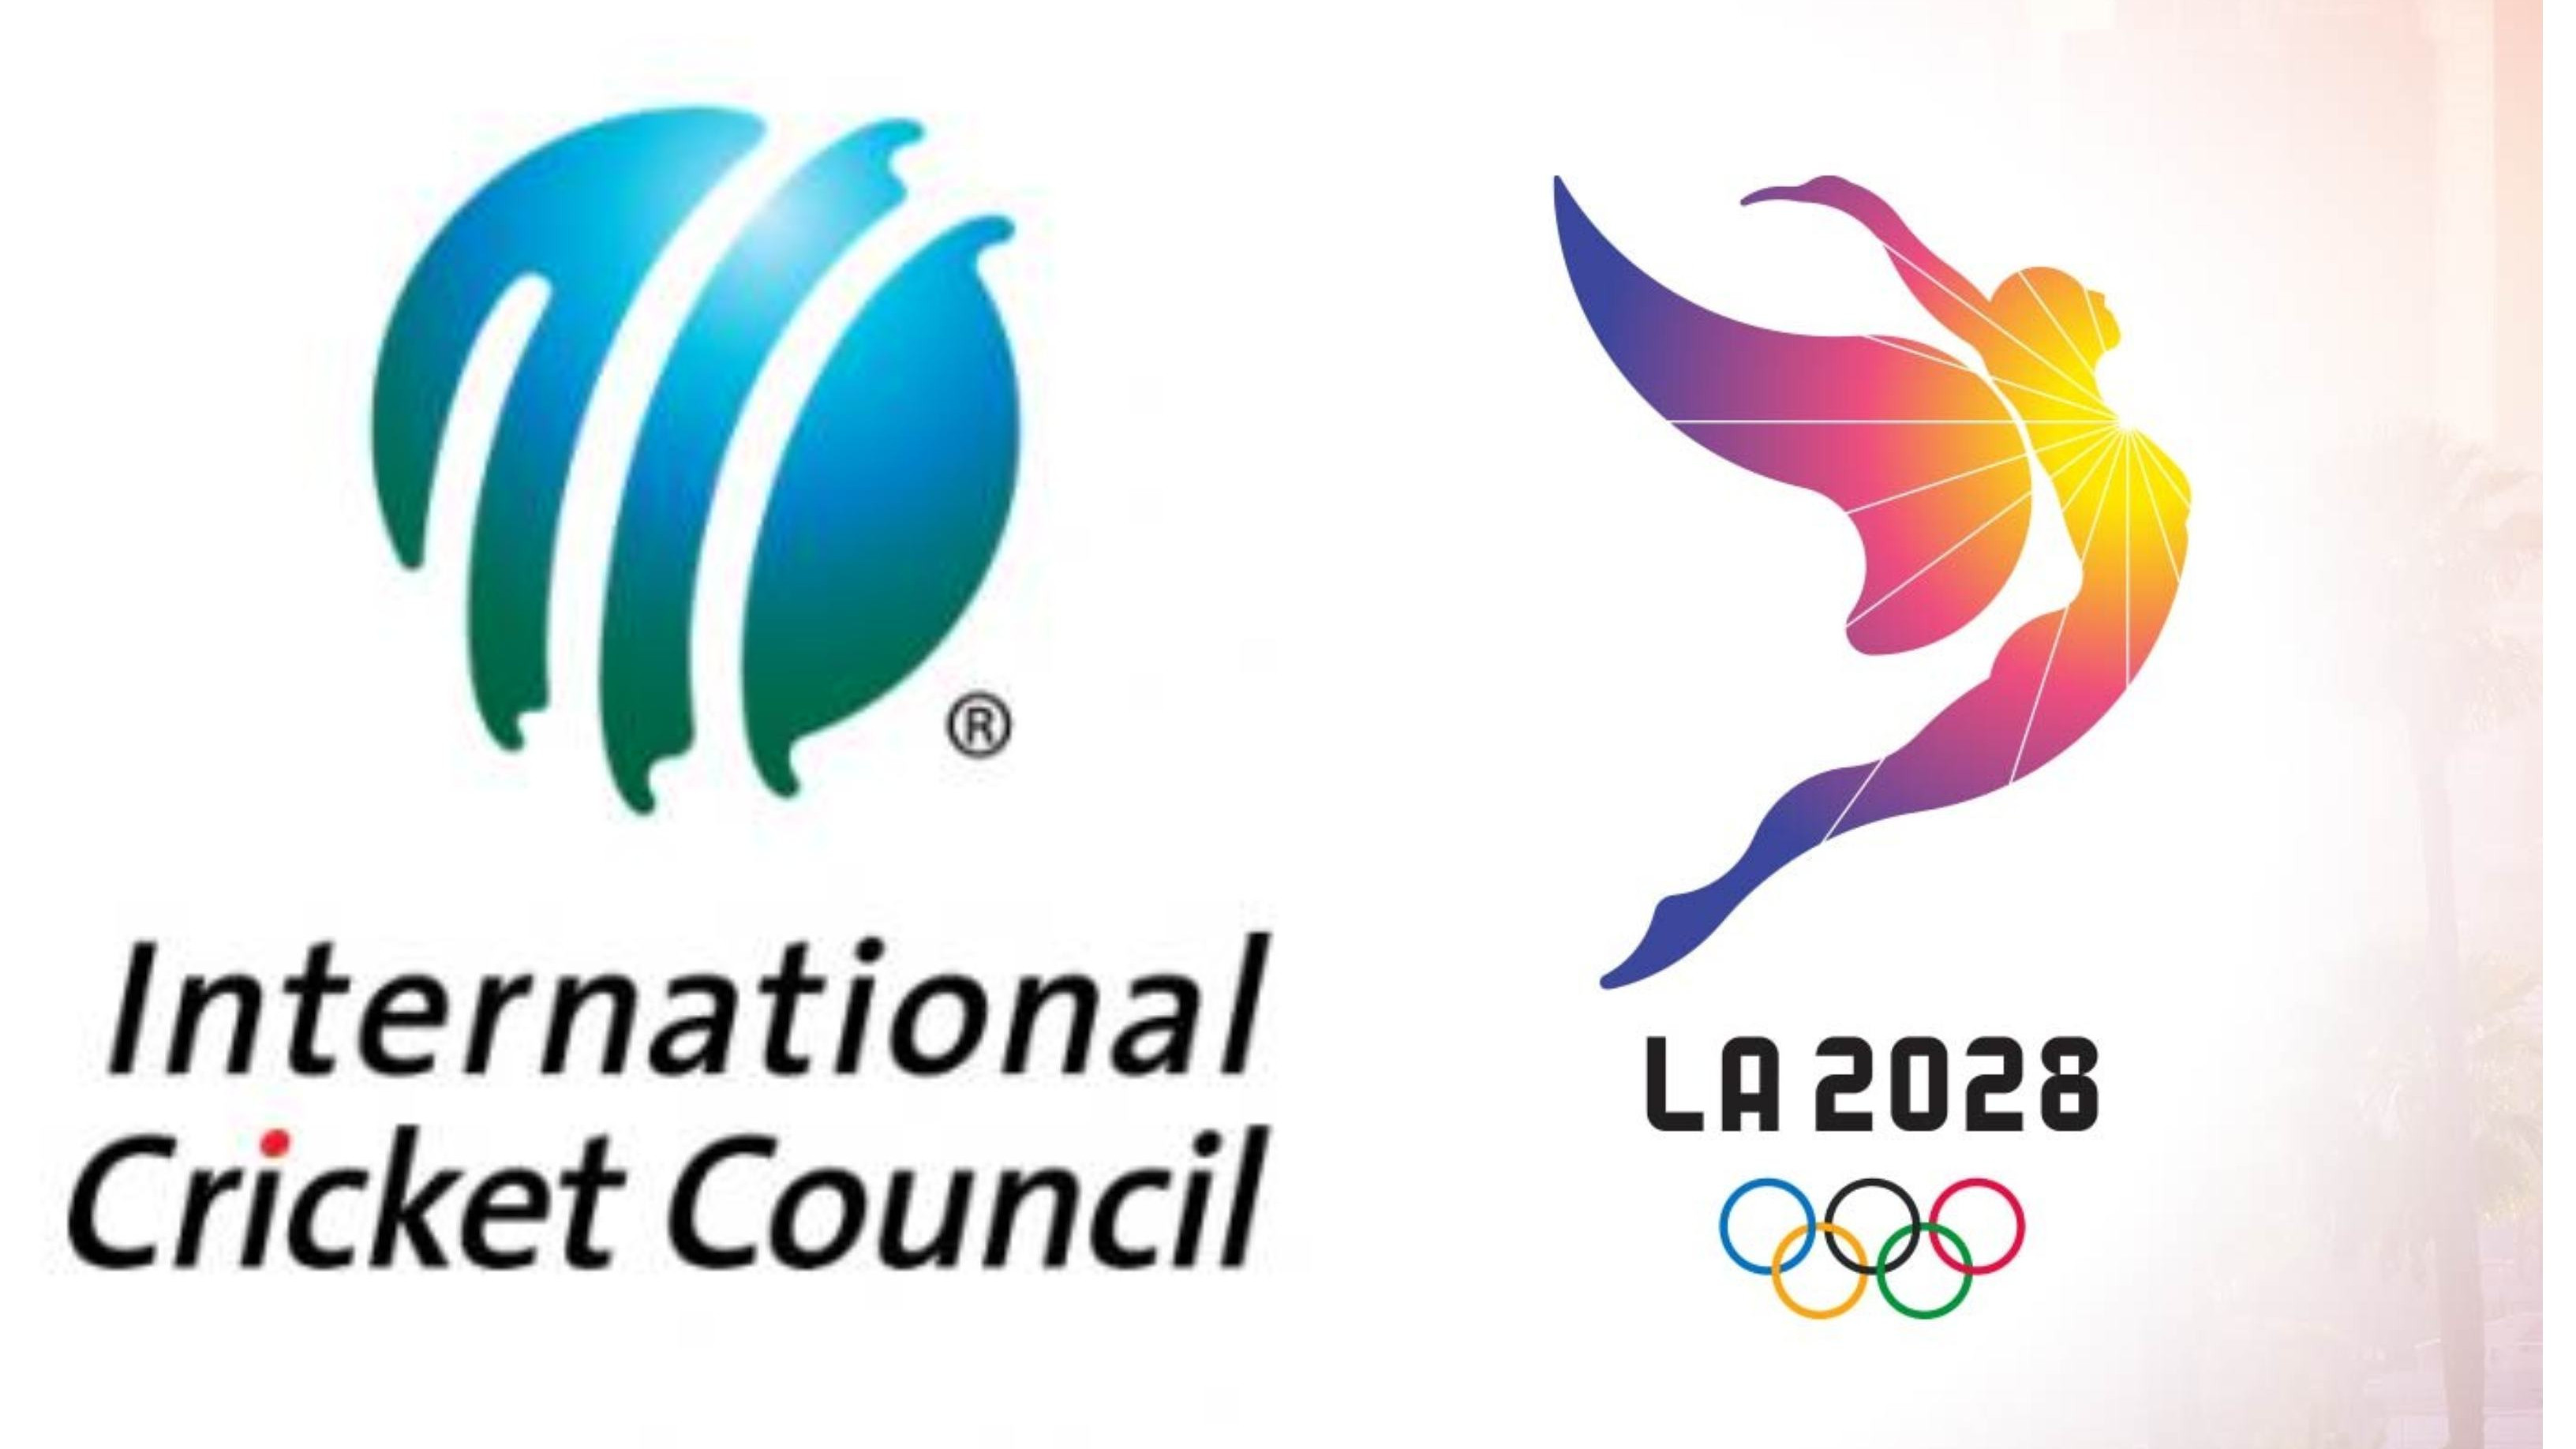 ICC set to push for cricket’s inclusion in Olympics; Los Angeles 2028 primary target